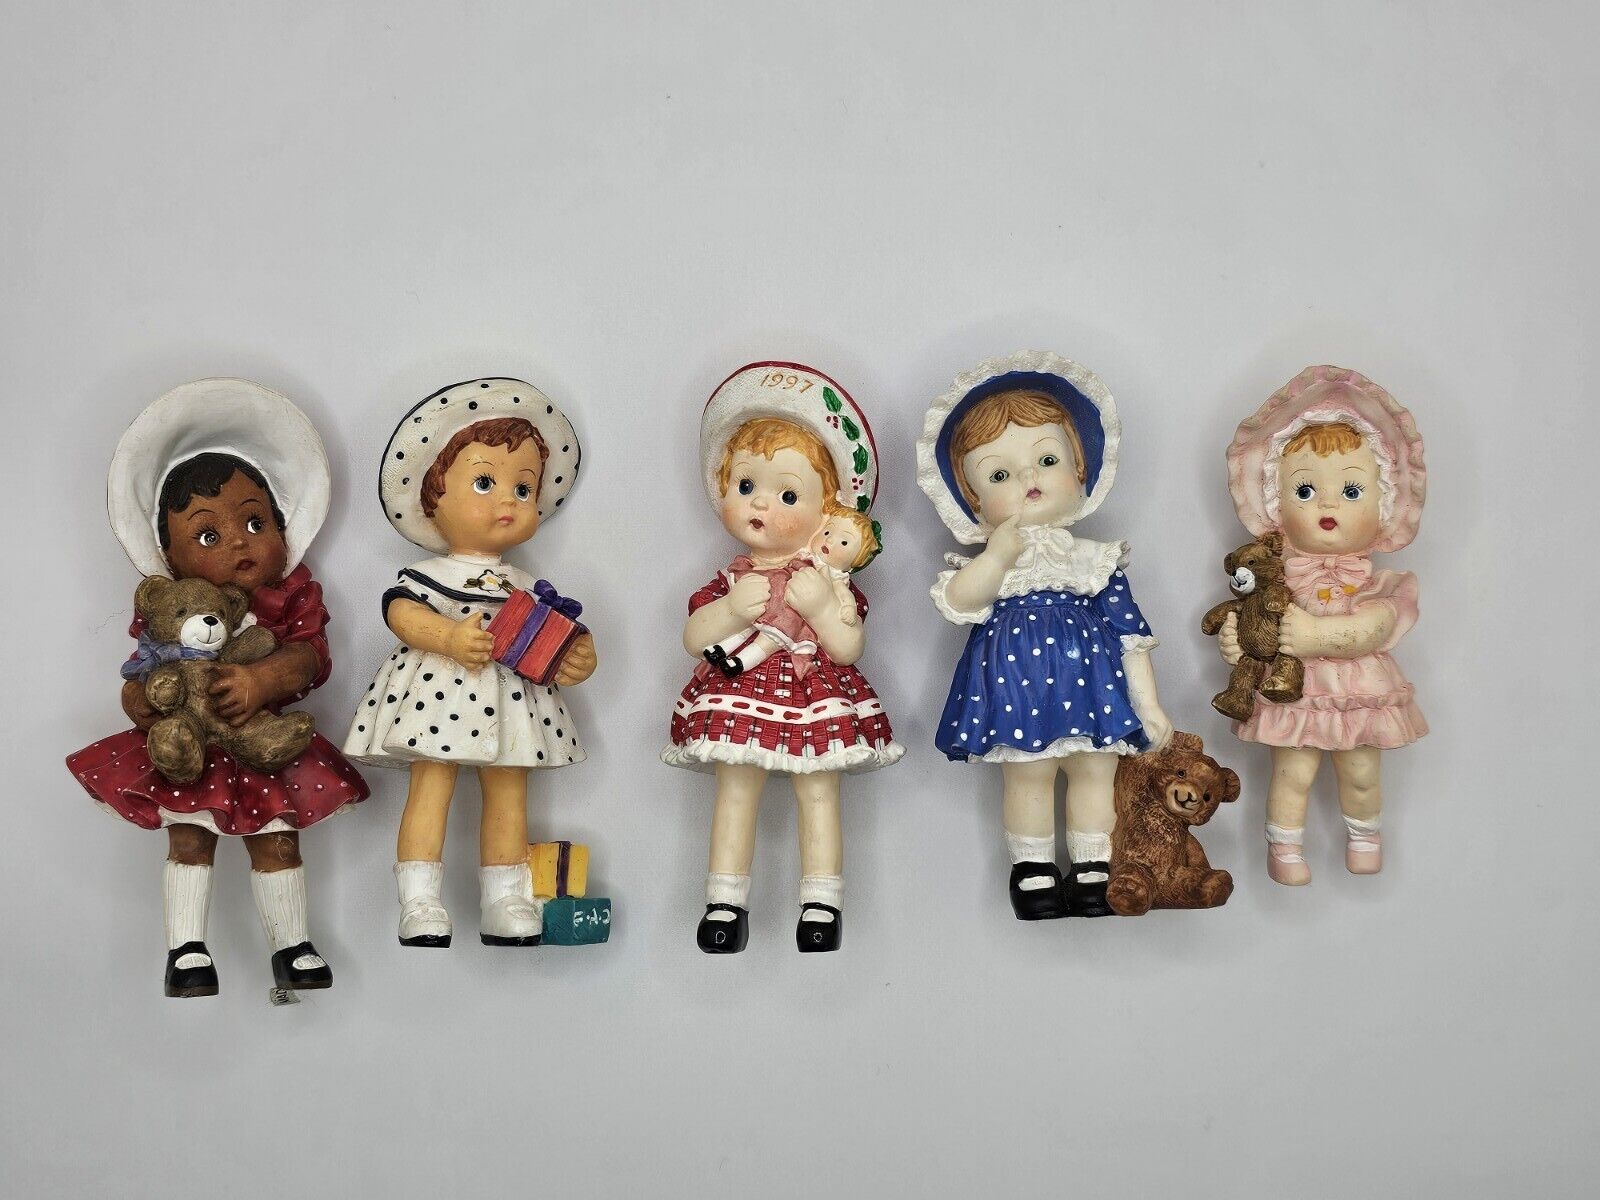 Effanbee Doll Ornaments - Lot of 5 Figurines